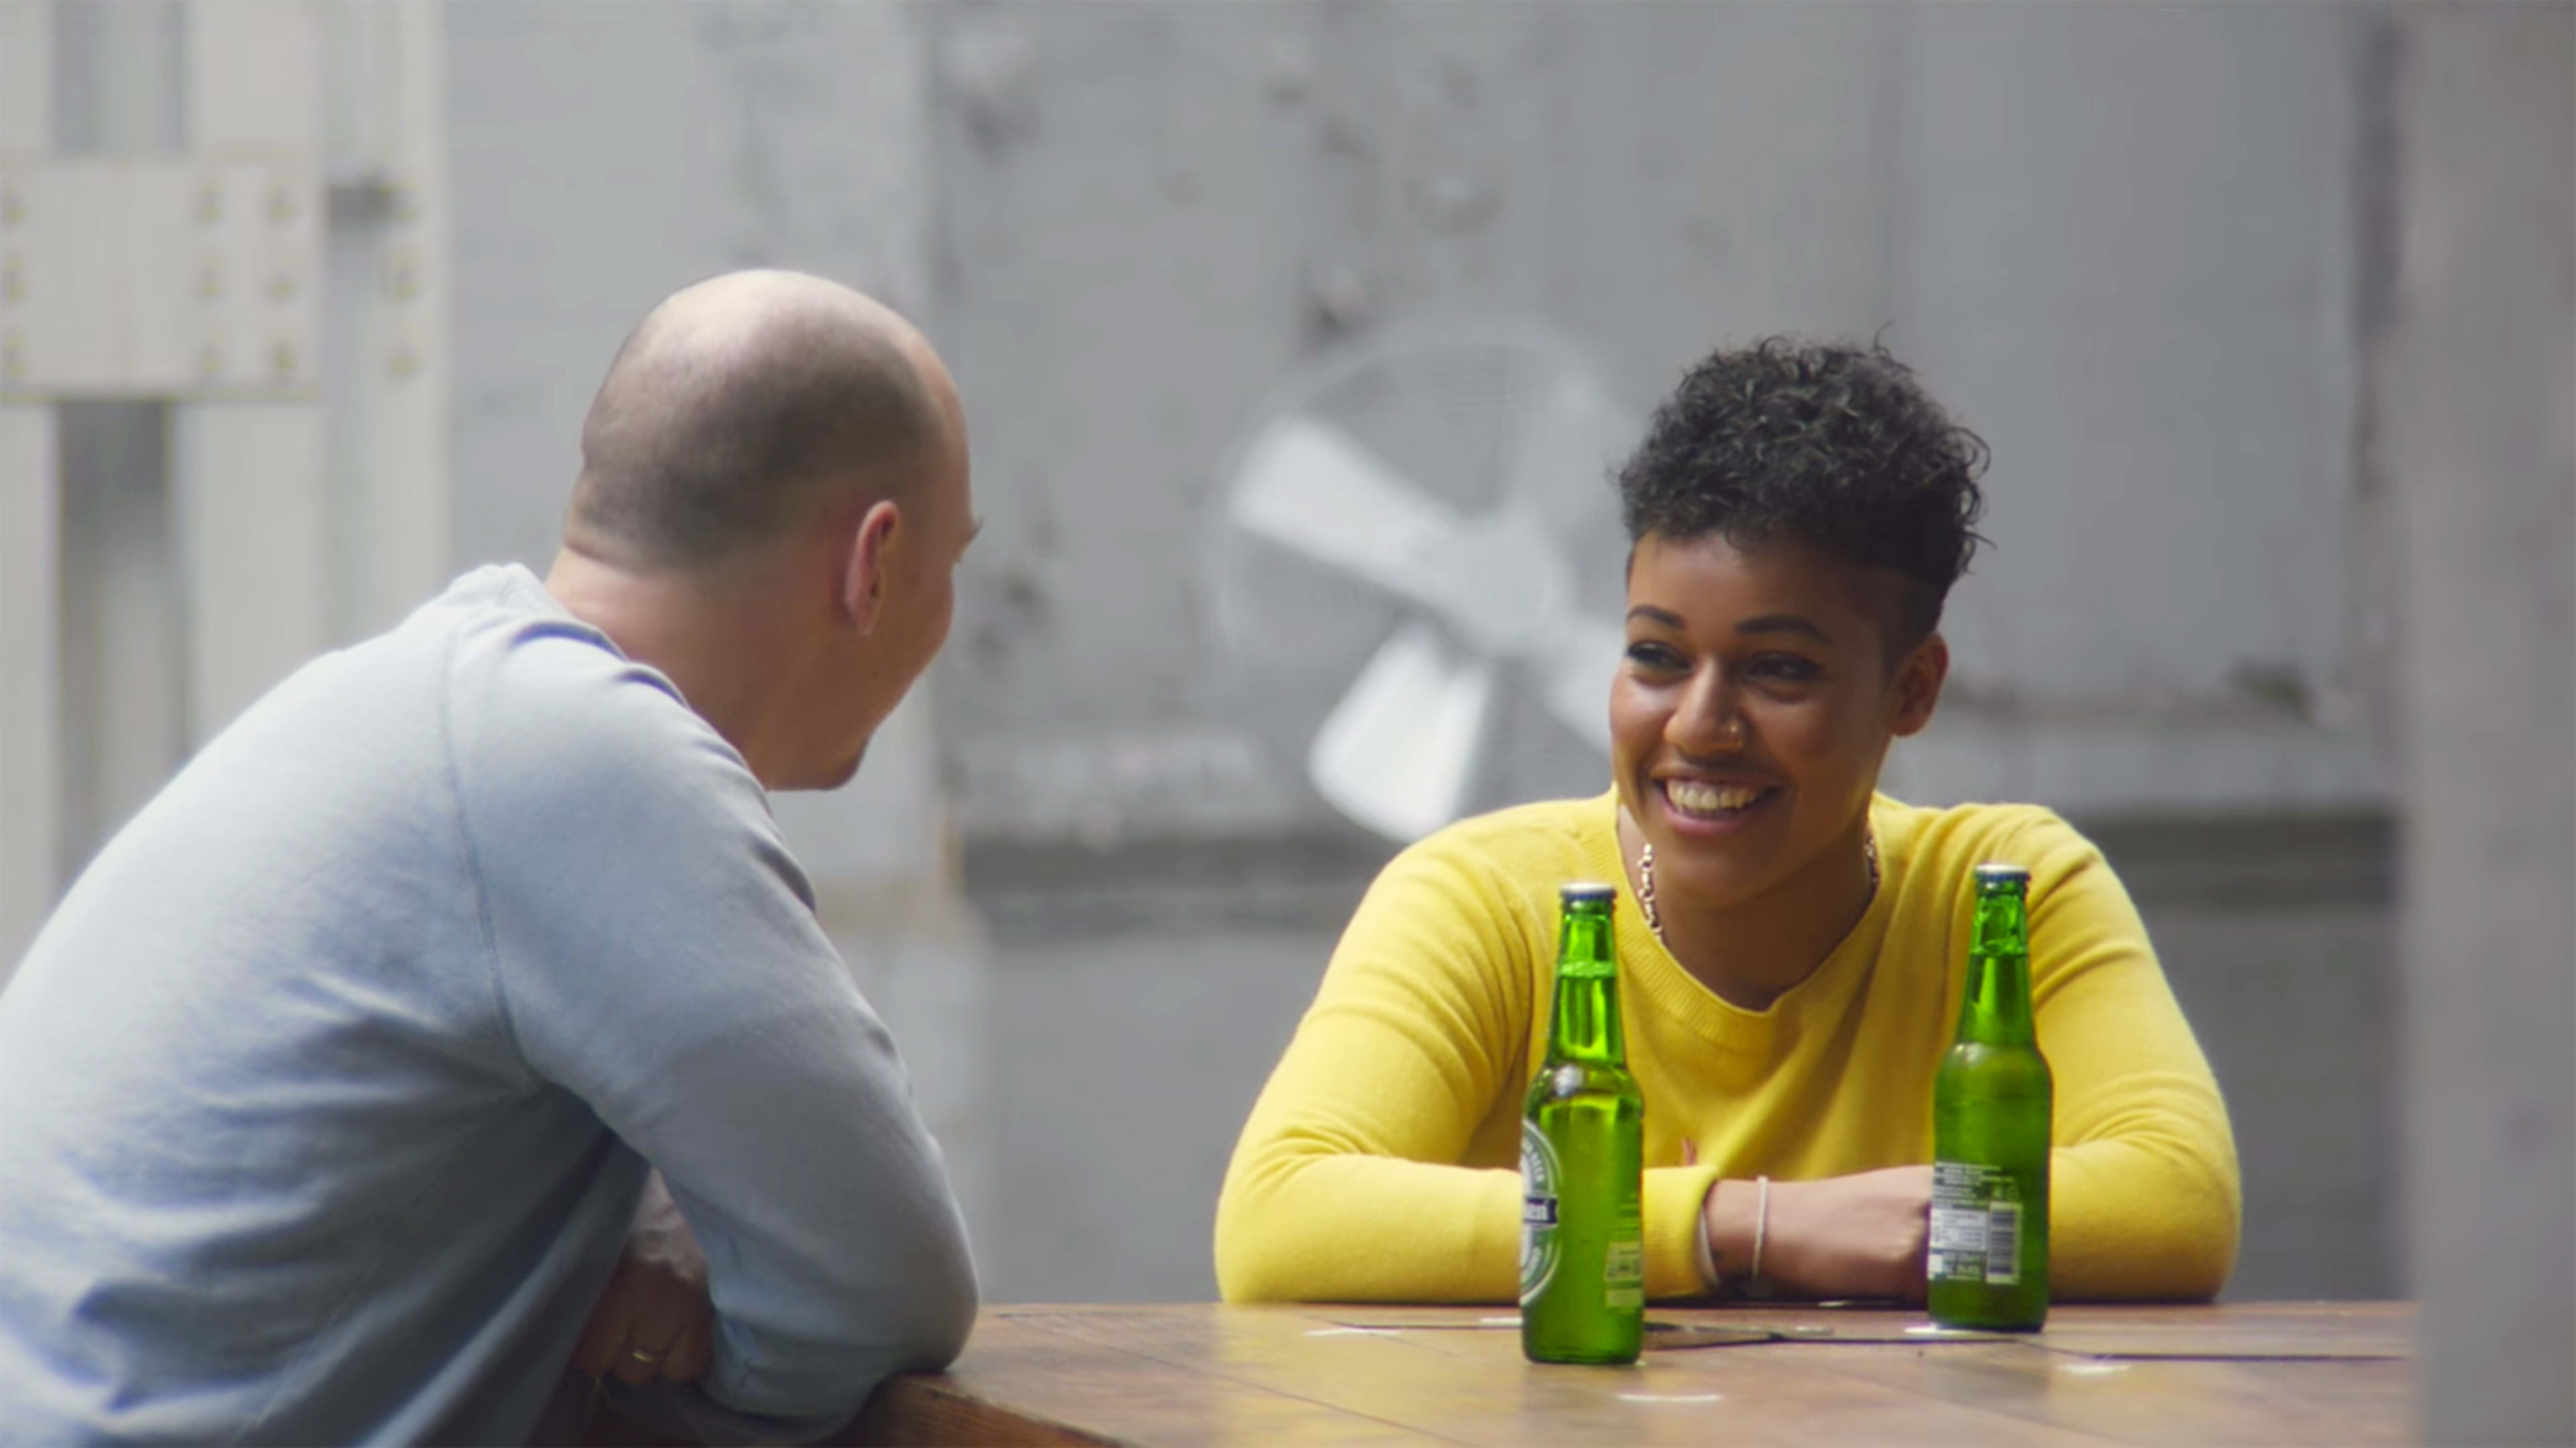 Here’s How Heineken Made That Awesome Antidote To Pepsi’s Kendall Jenner Ad